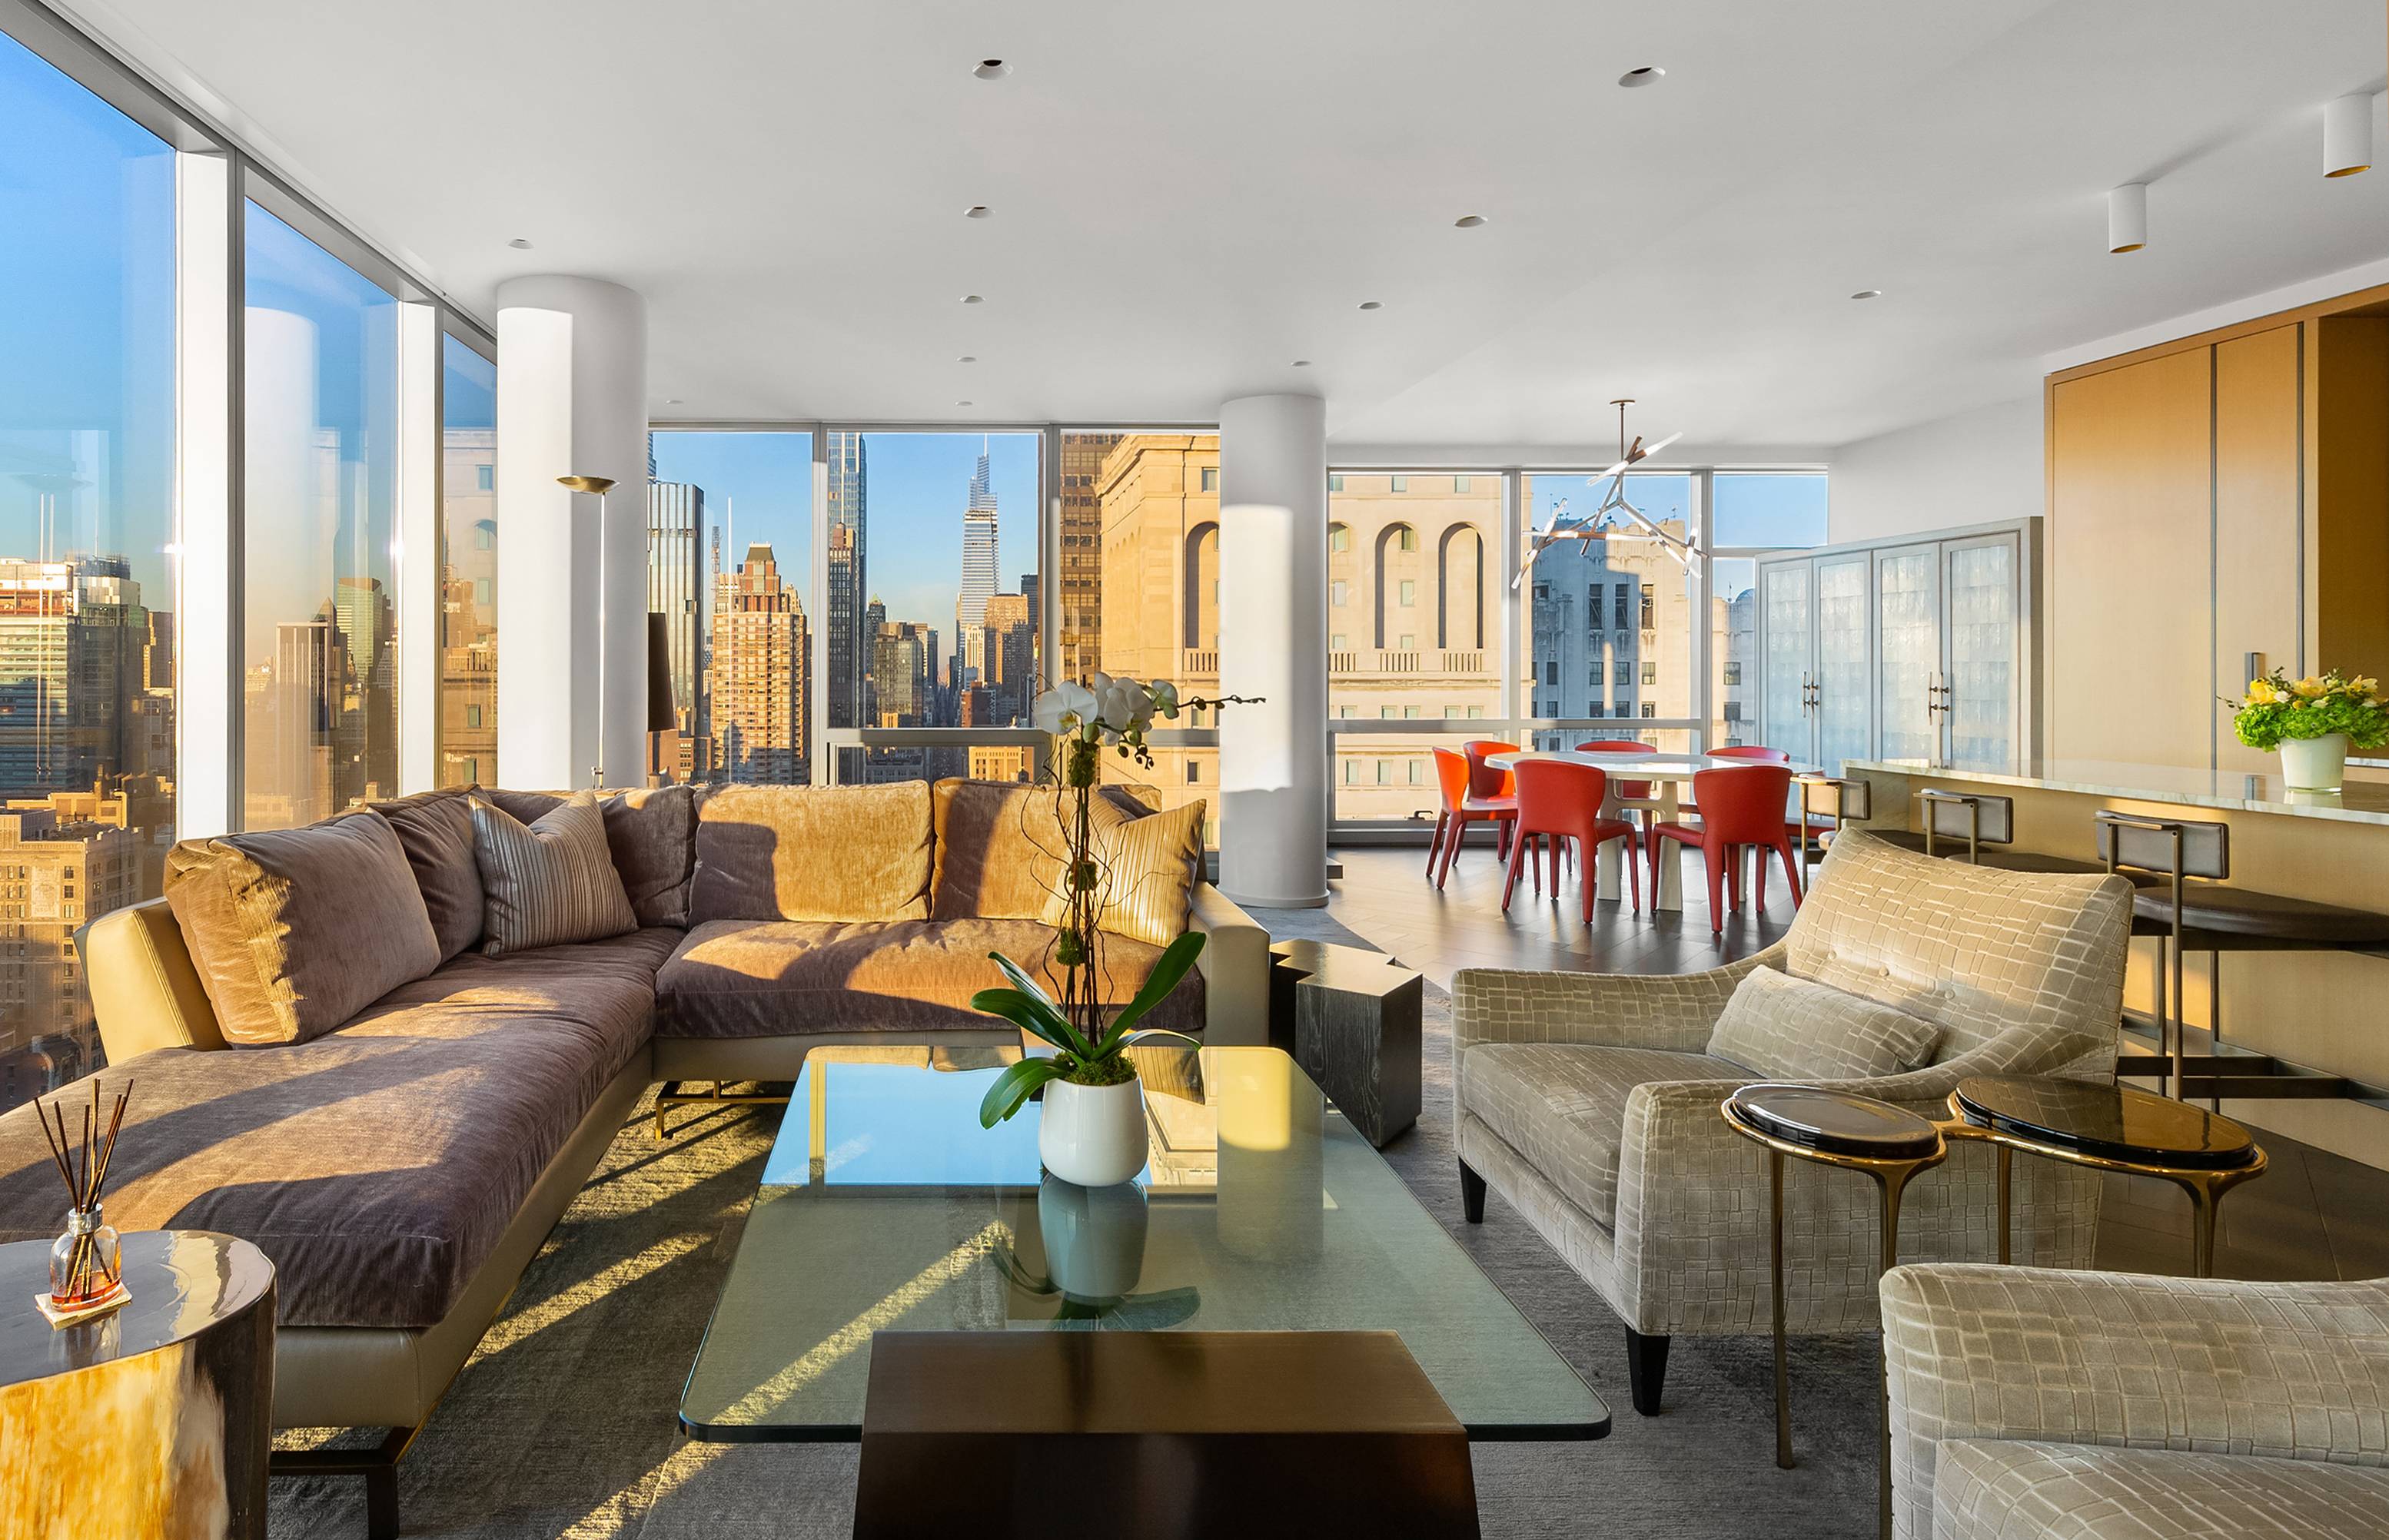 With unparalleled, 360o city views, this spectacular 3, 300 sq.